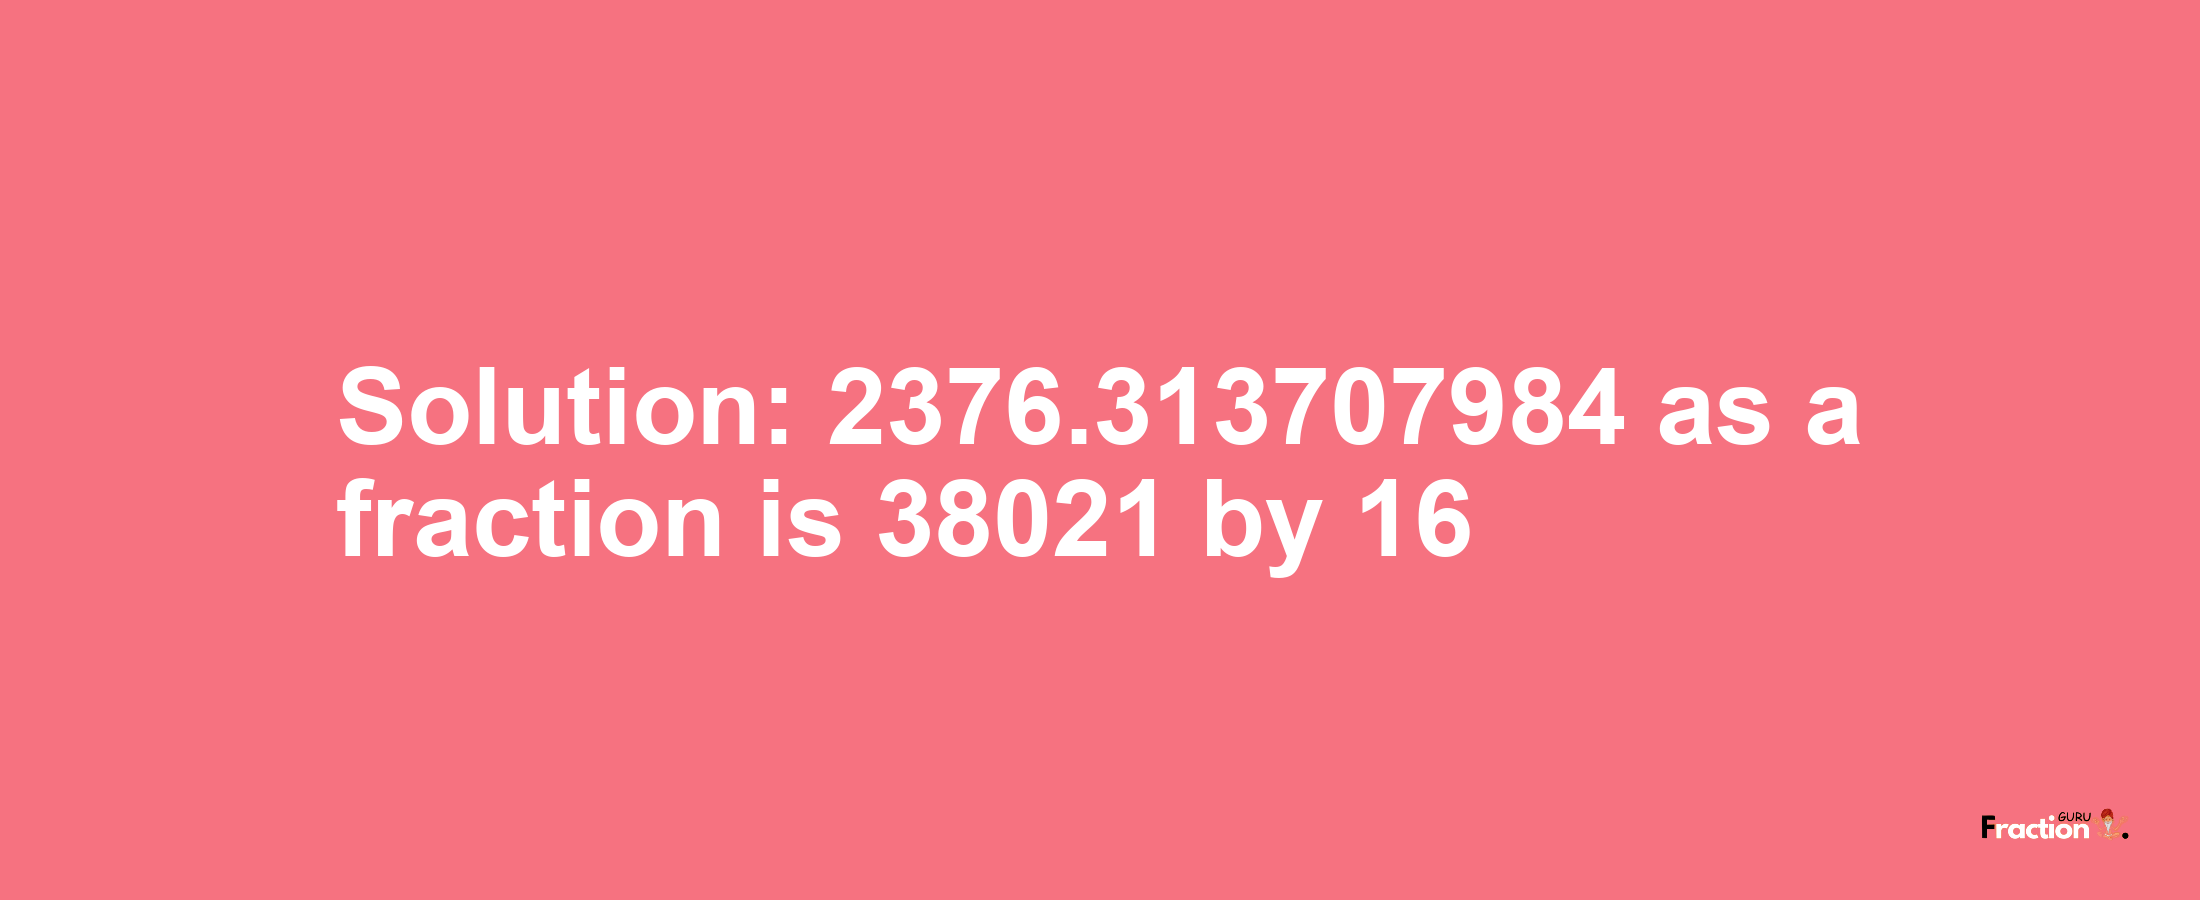 Solution:2376.313707984 as a fraction is 38021/16